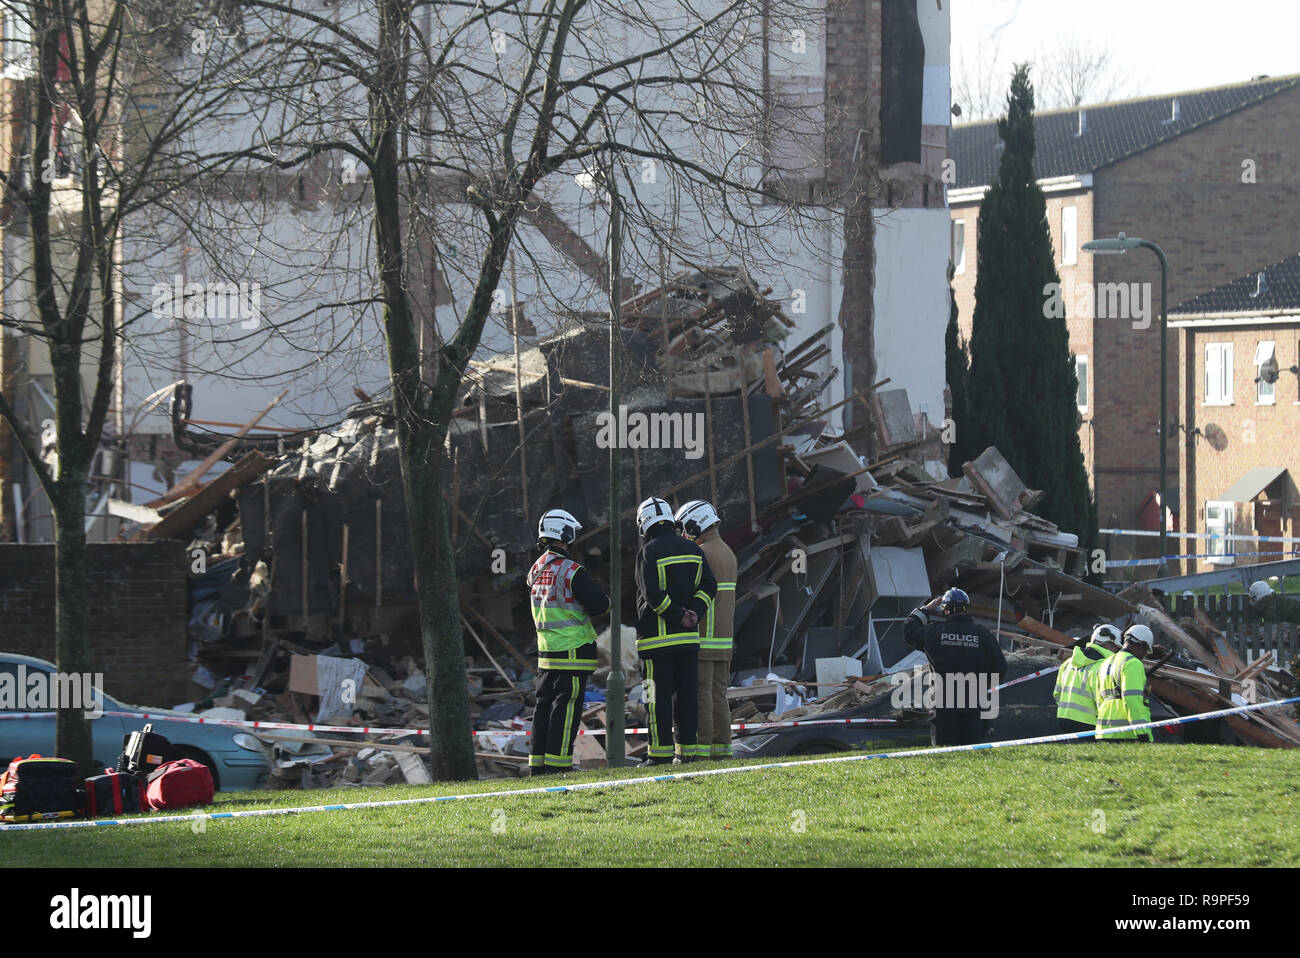 Emergency service personnel in Launcelot Close, Andover, where Hampshire Police say that the body of a man has been found after an explosion caused a building to collapse this morning. Stock Photo